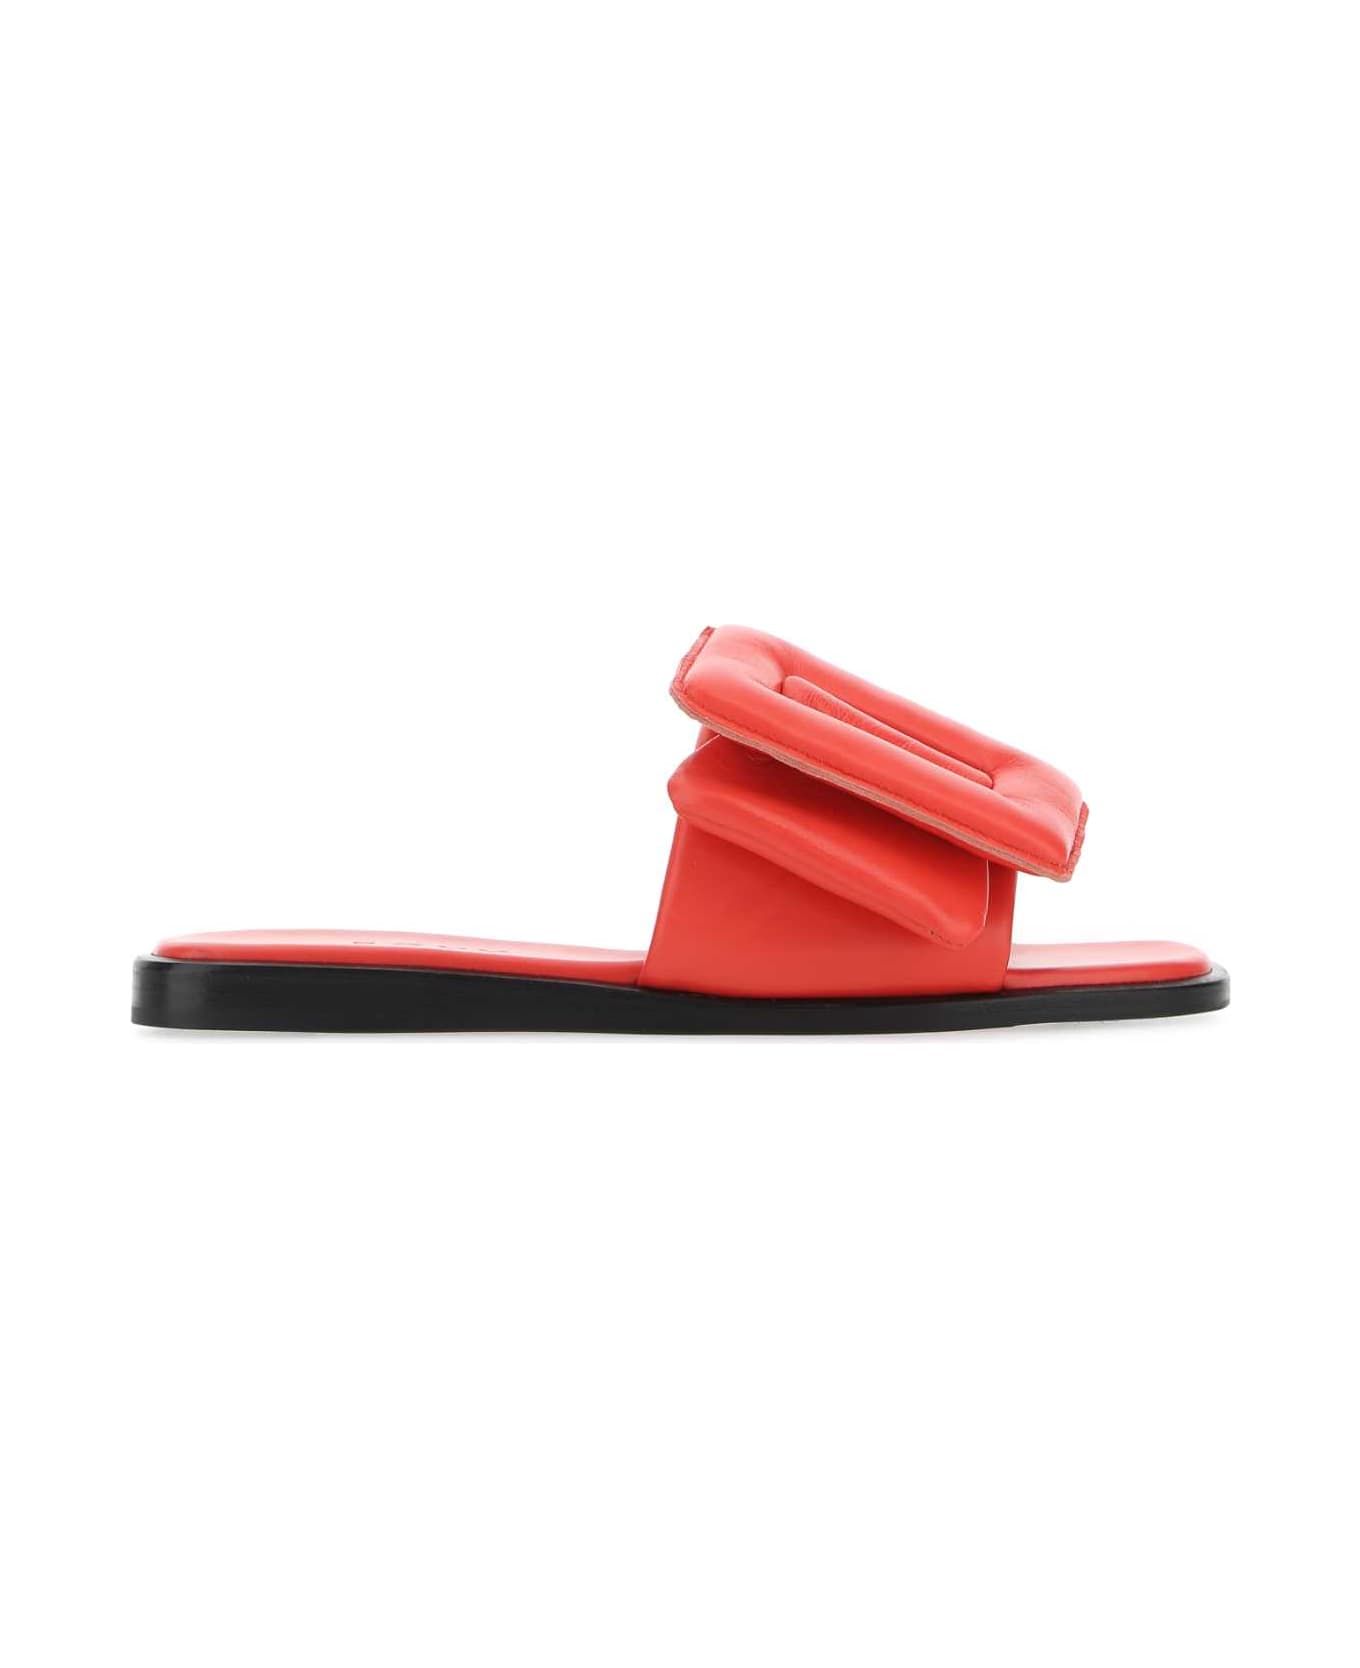 BOYY Red Leather Puffy Slippers - POPPYRED